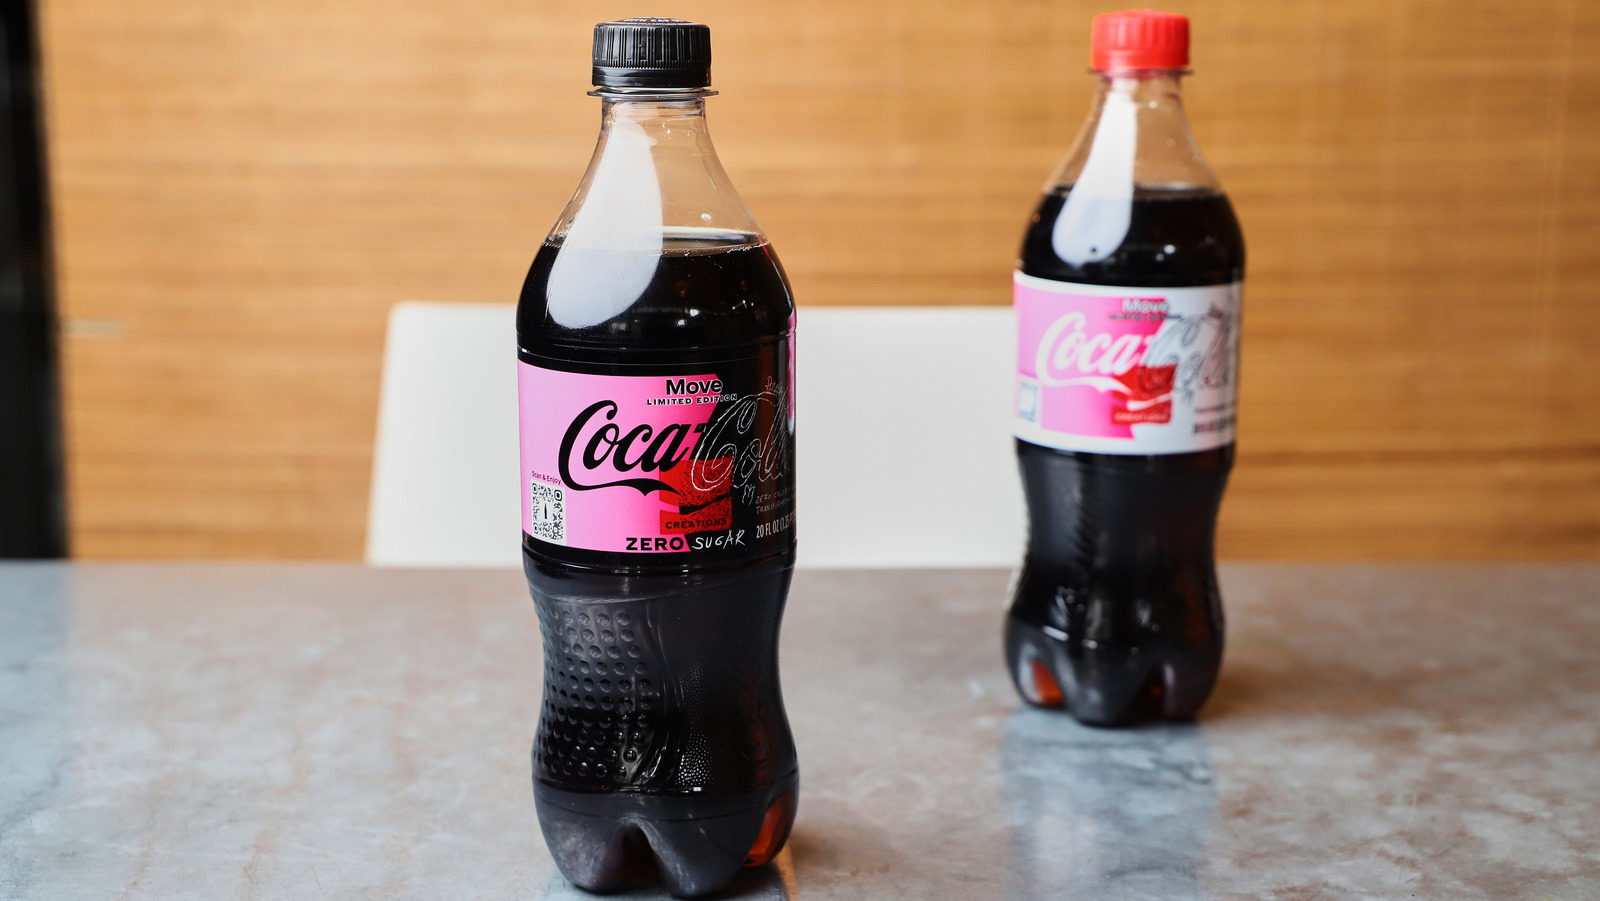 https://www.tastingtable.com/img/gallery/we-tried-the-new-coke-transformation-flavor-so-you-dont-have-to/l-intro-1678470513.jpg